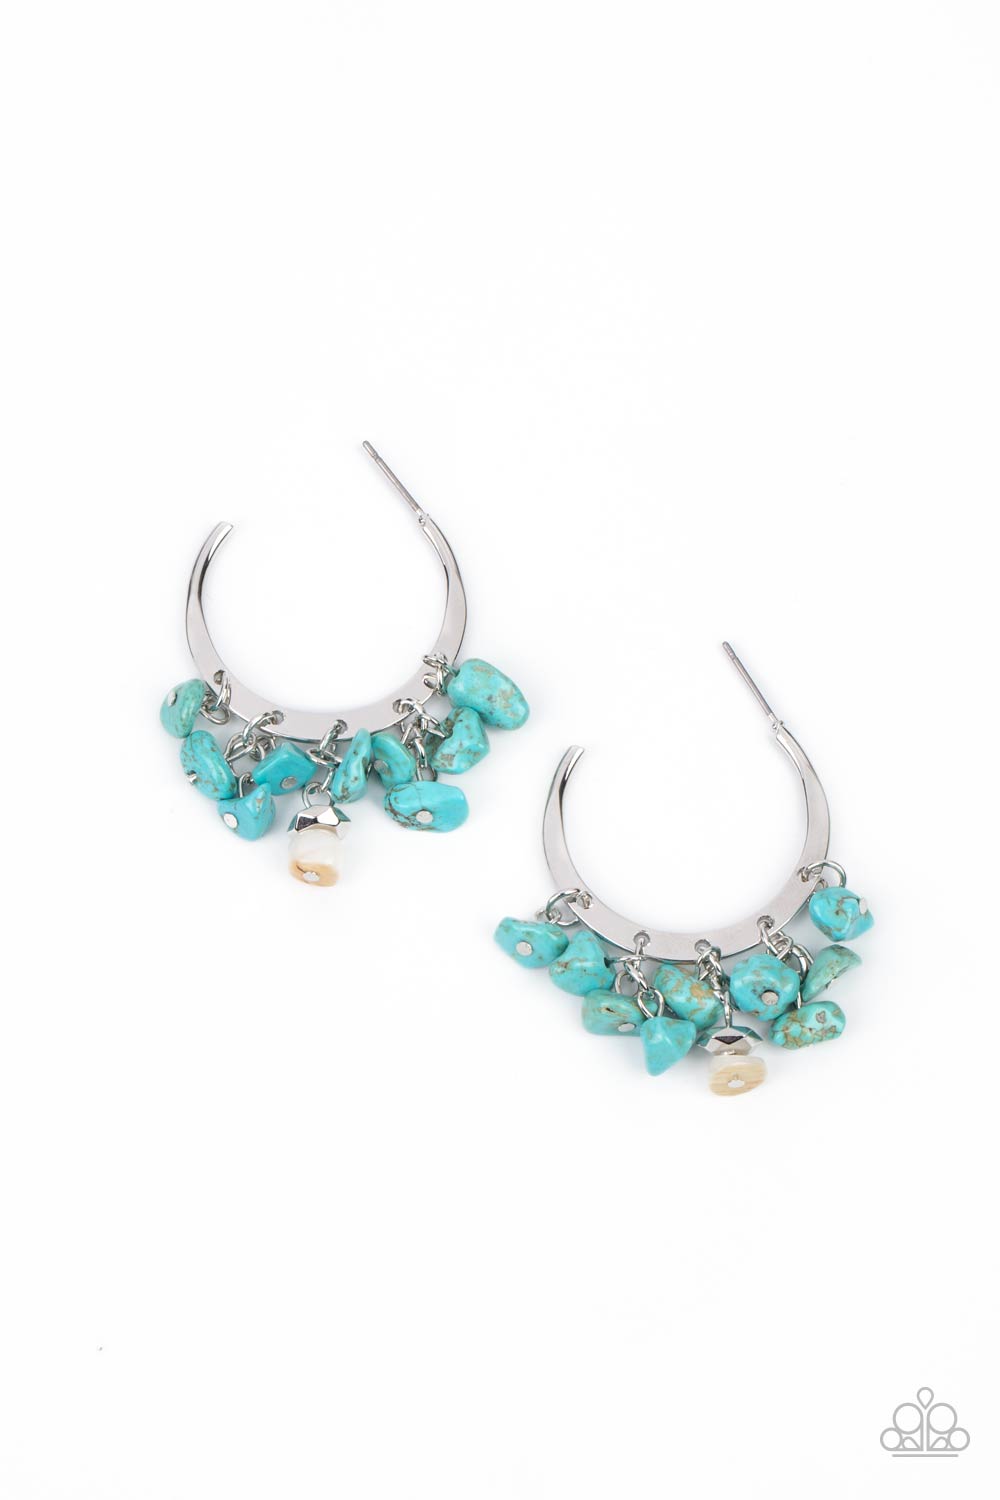 Gorgeously Grounding - Blue Turquoise Earrings